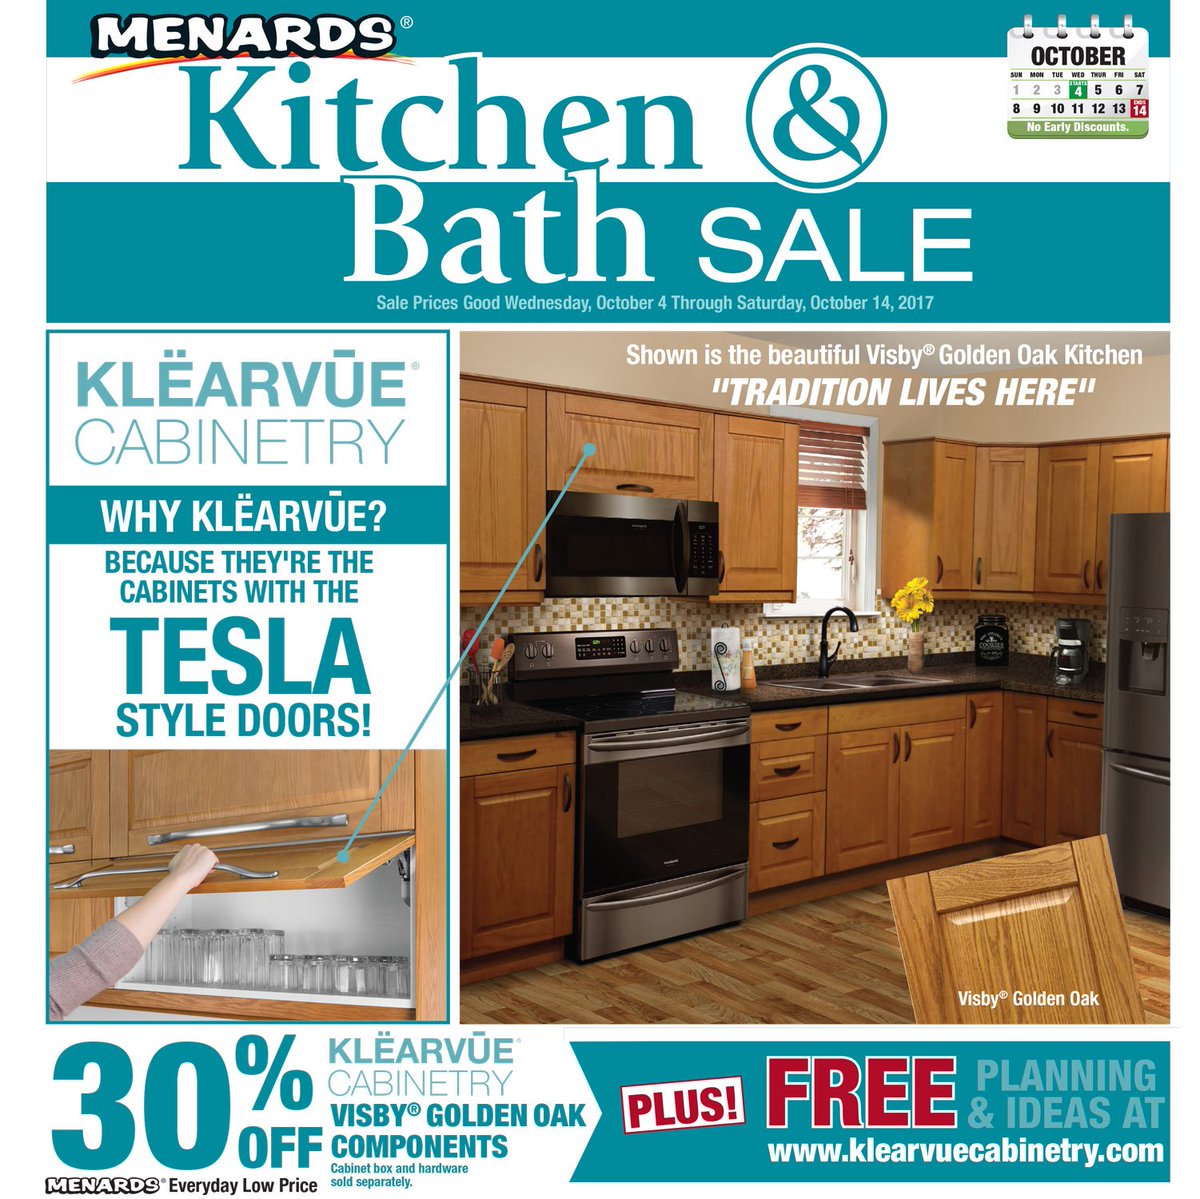 Menards On Twitter Time For A Remodel Our Kitchen And Bath